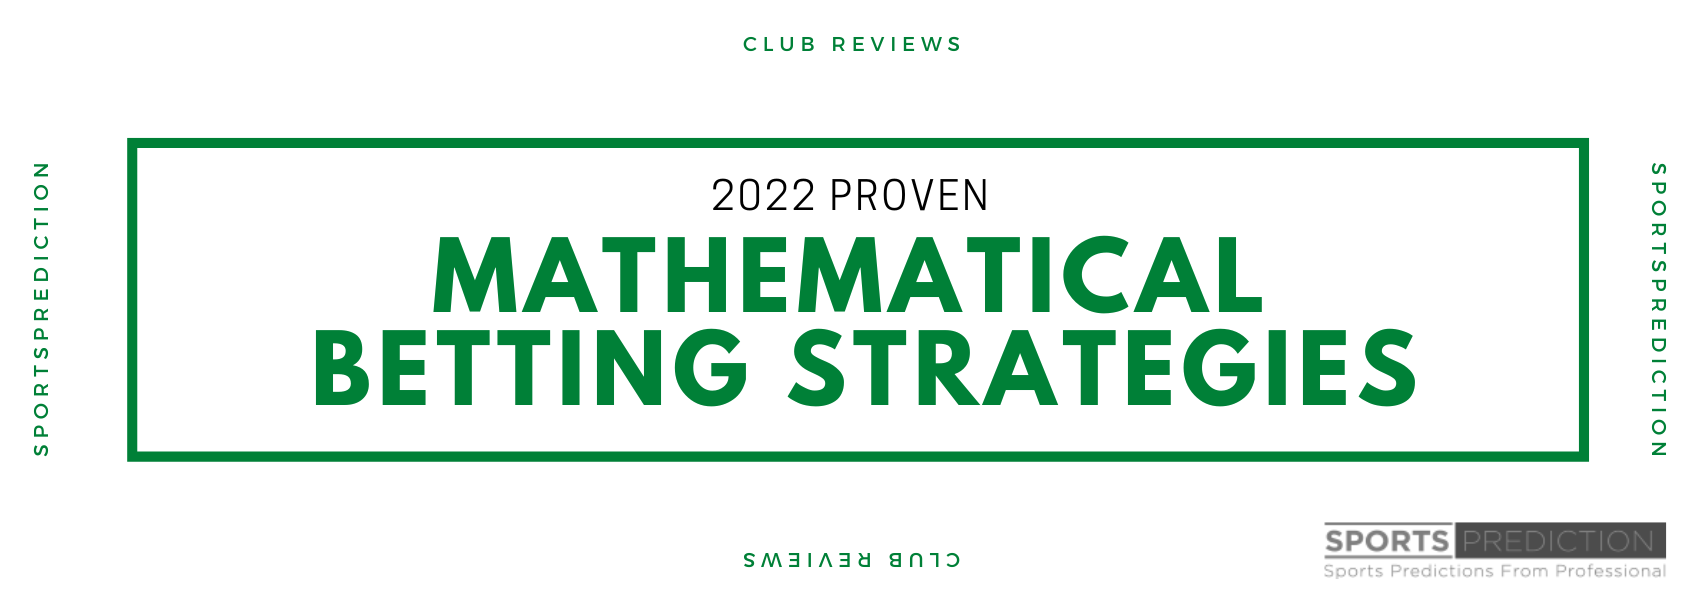 Proven 2022 Mathematical Strategies For Soccer Betting